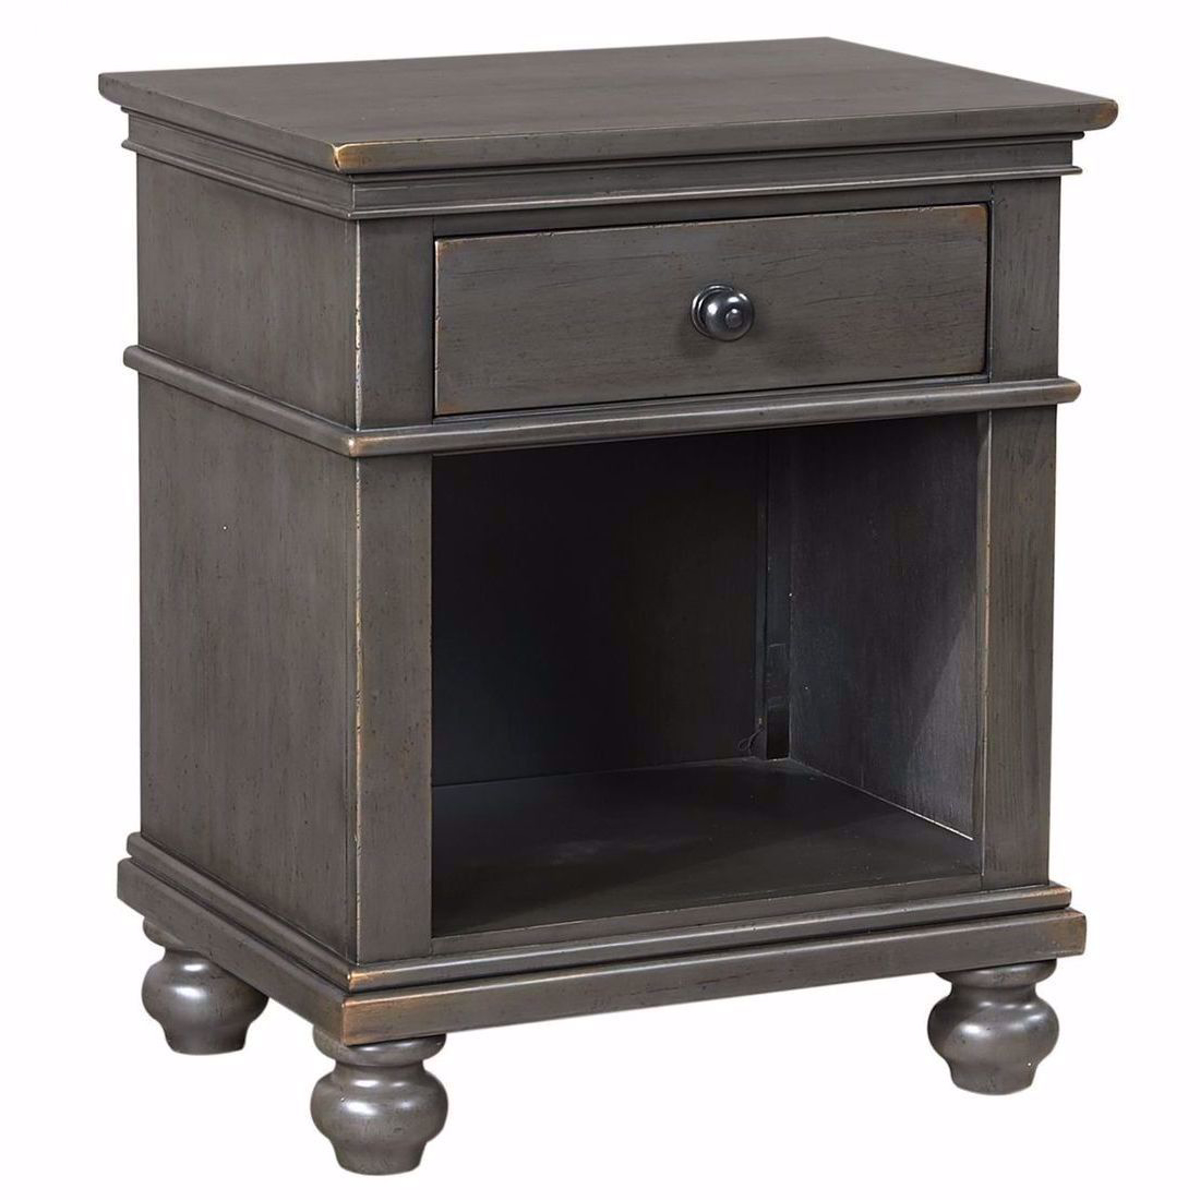 Picture of Oxford Peppercorn Bedroom Collection